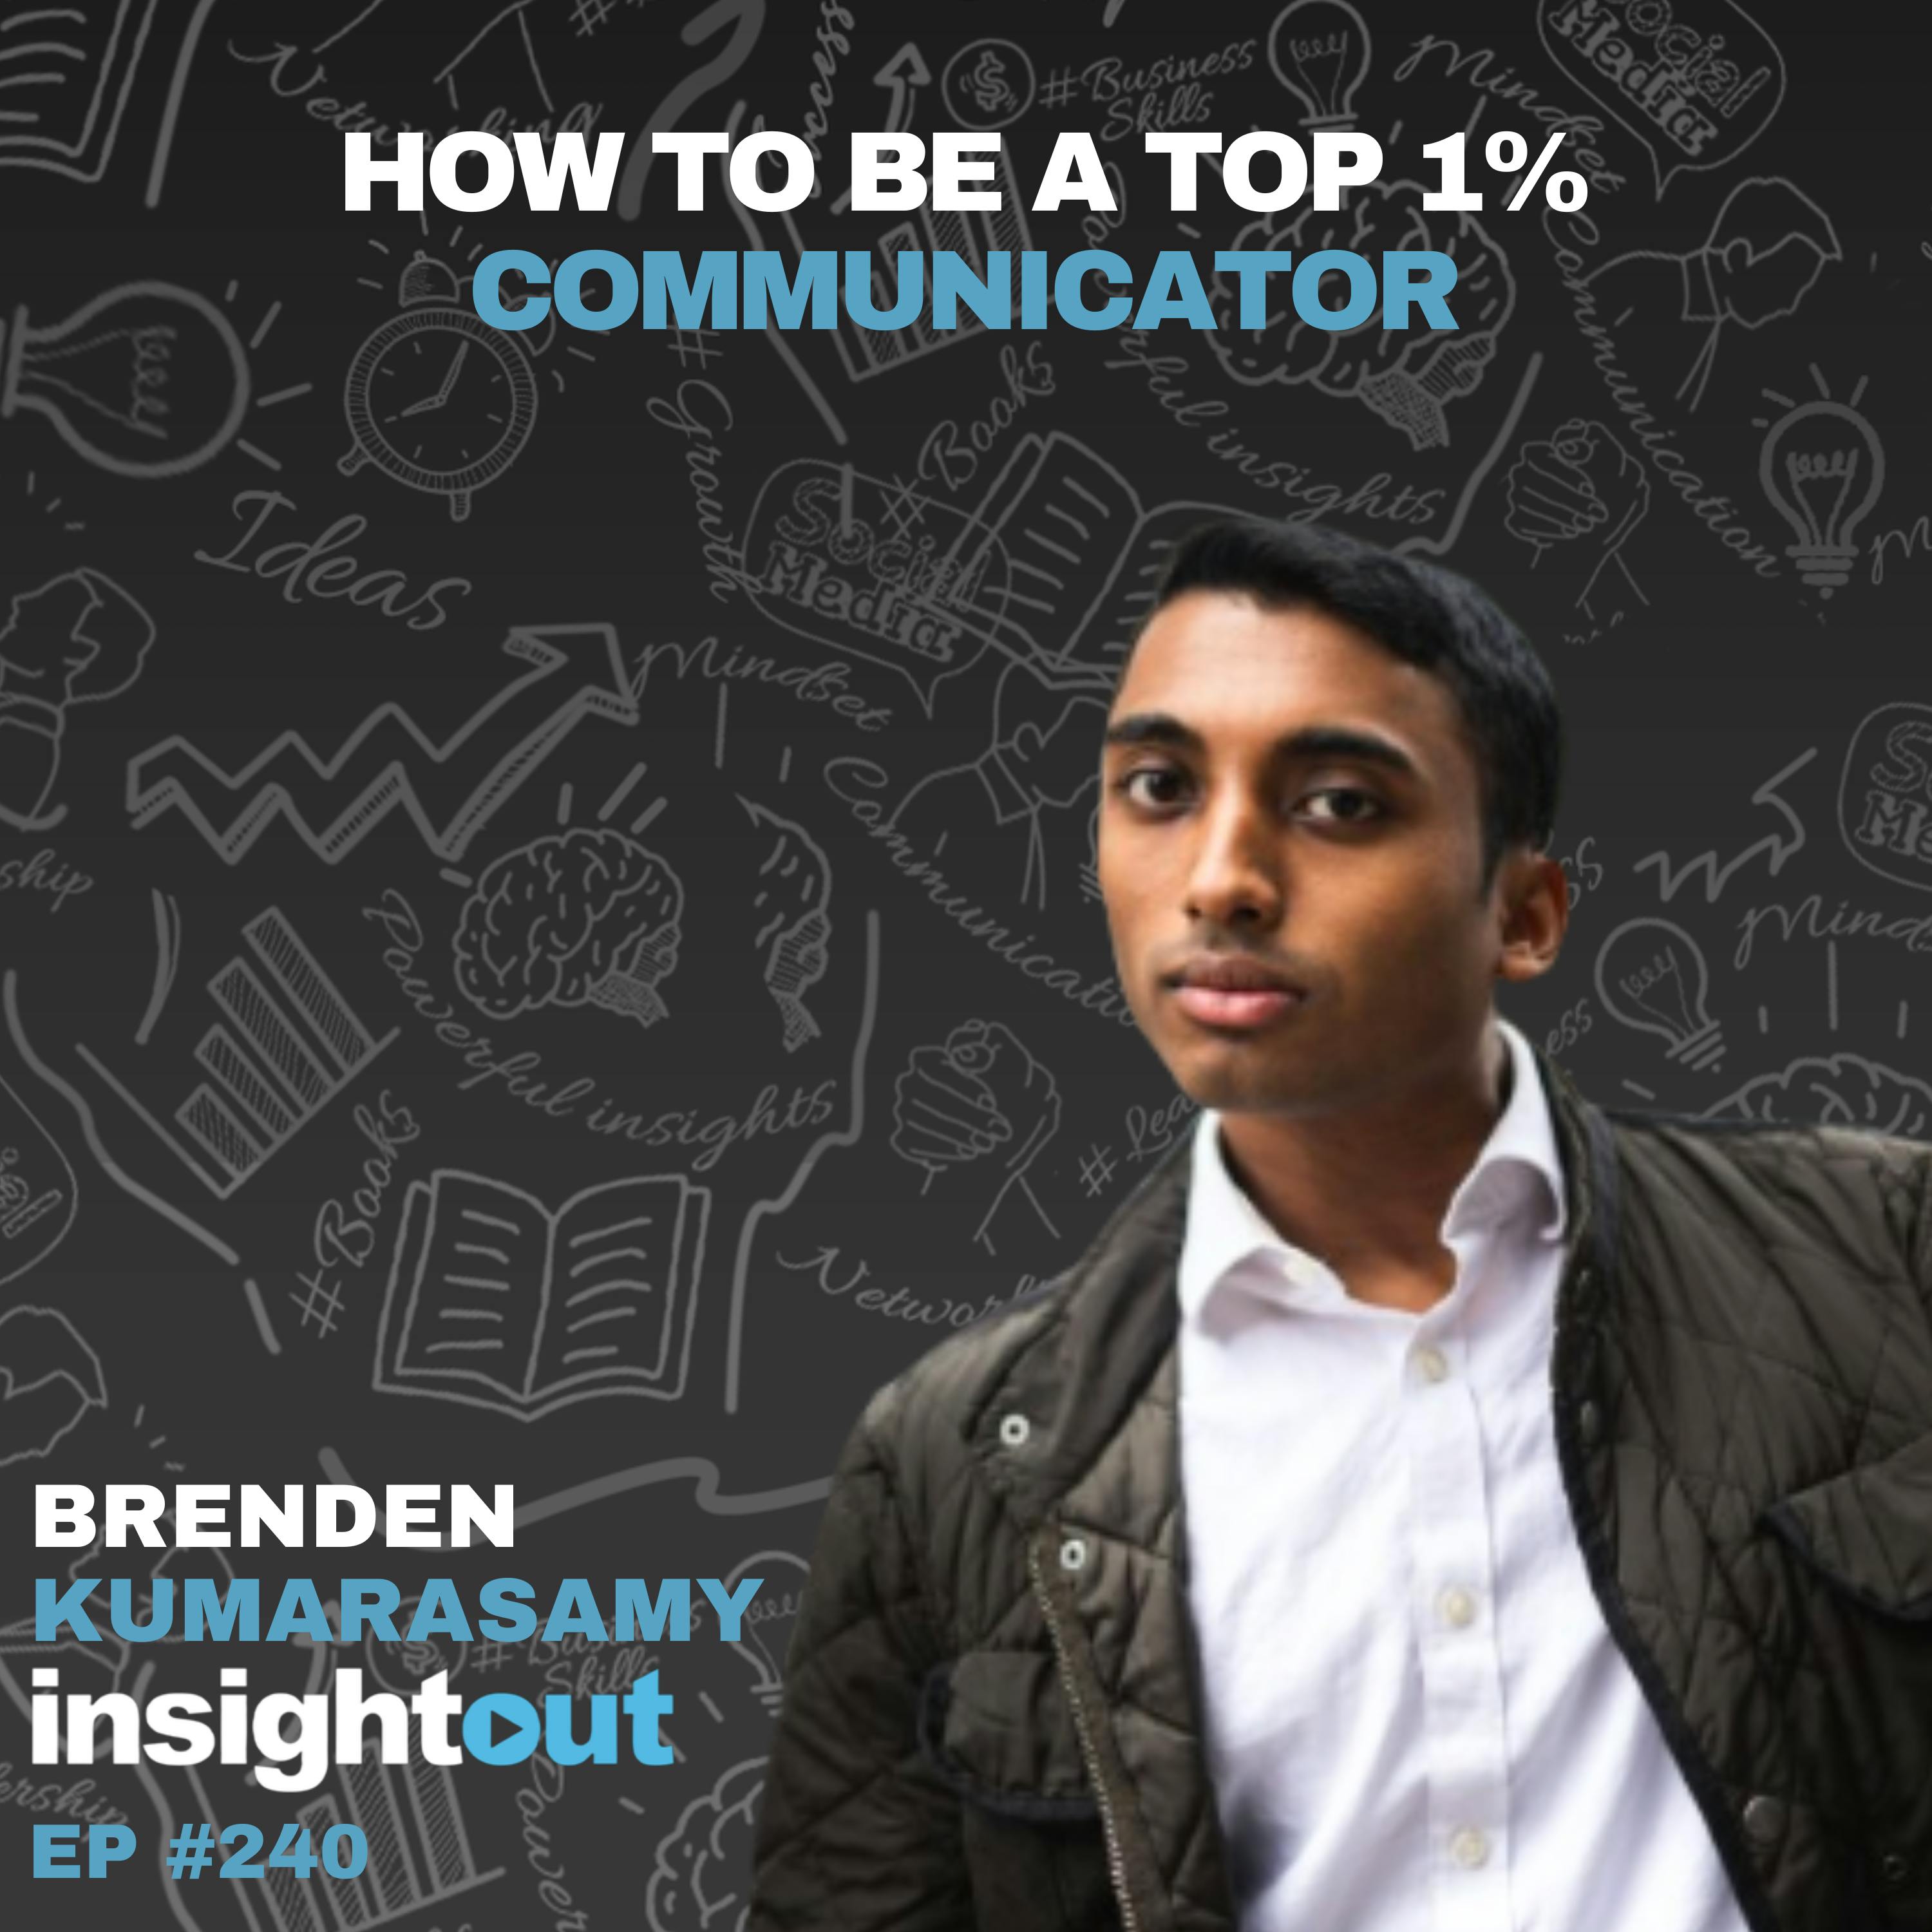 How to Be a Top 1% Communicator with Brenden Kumarasamy